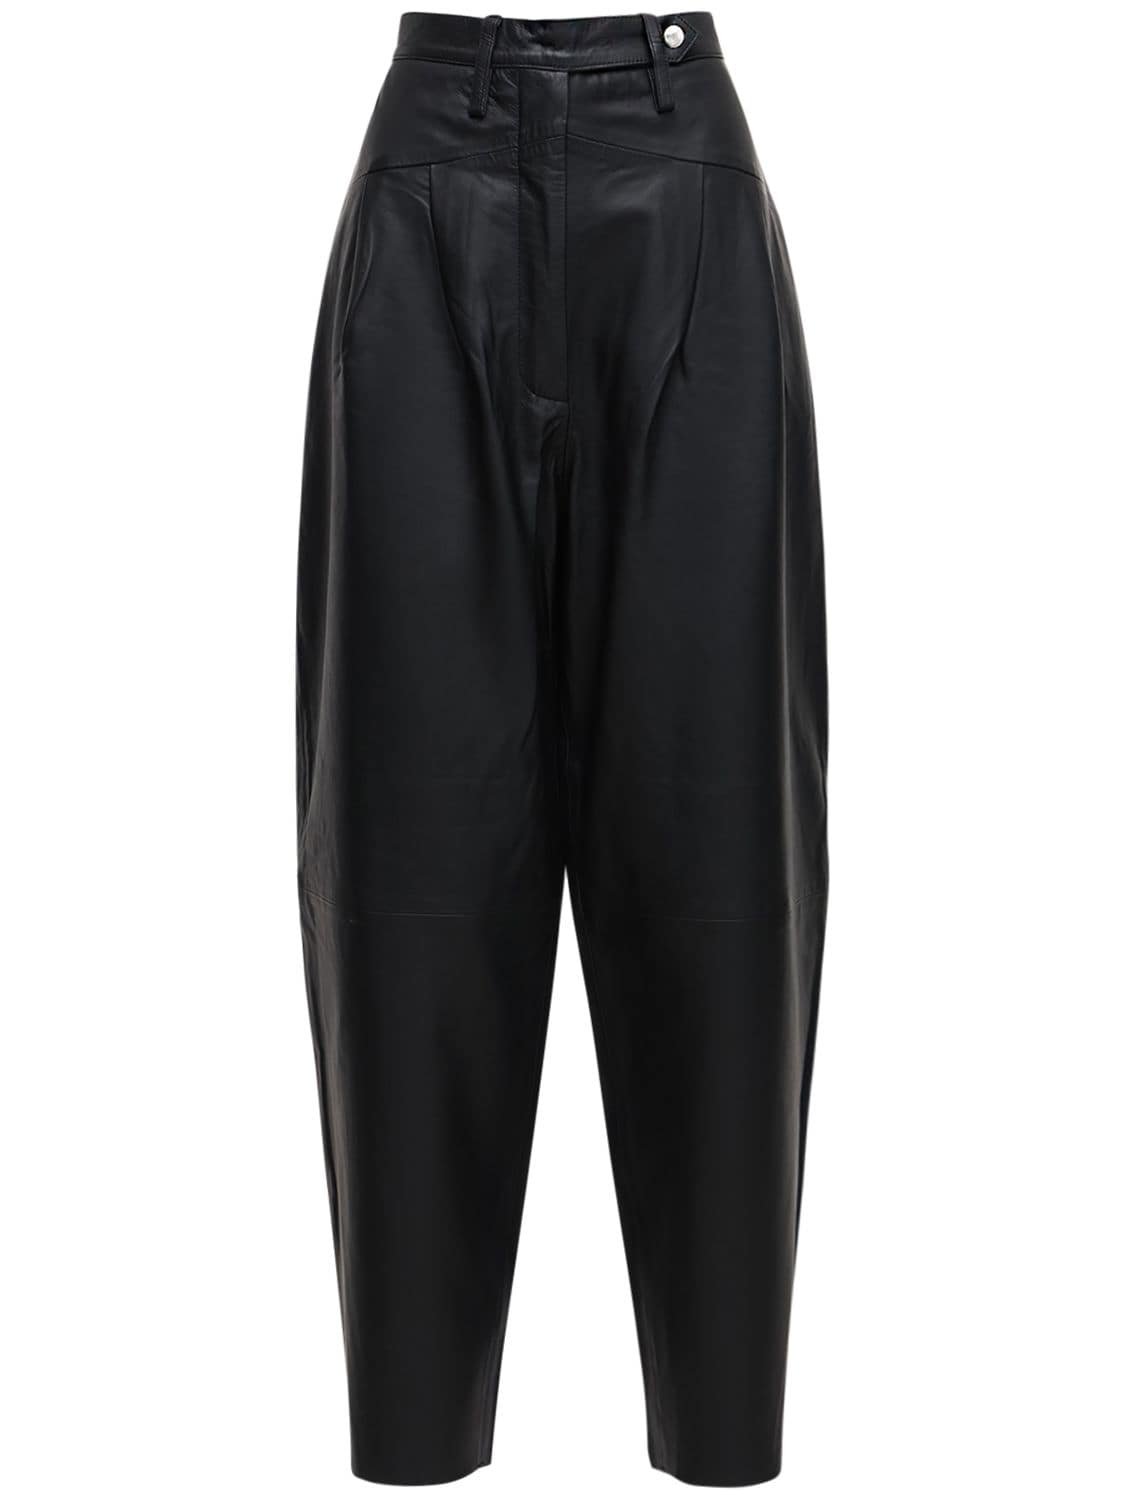 Remain Marionette Baggy Leather Pants In Black | ModeSens